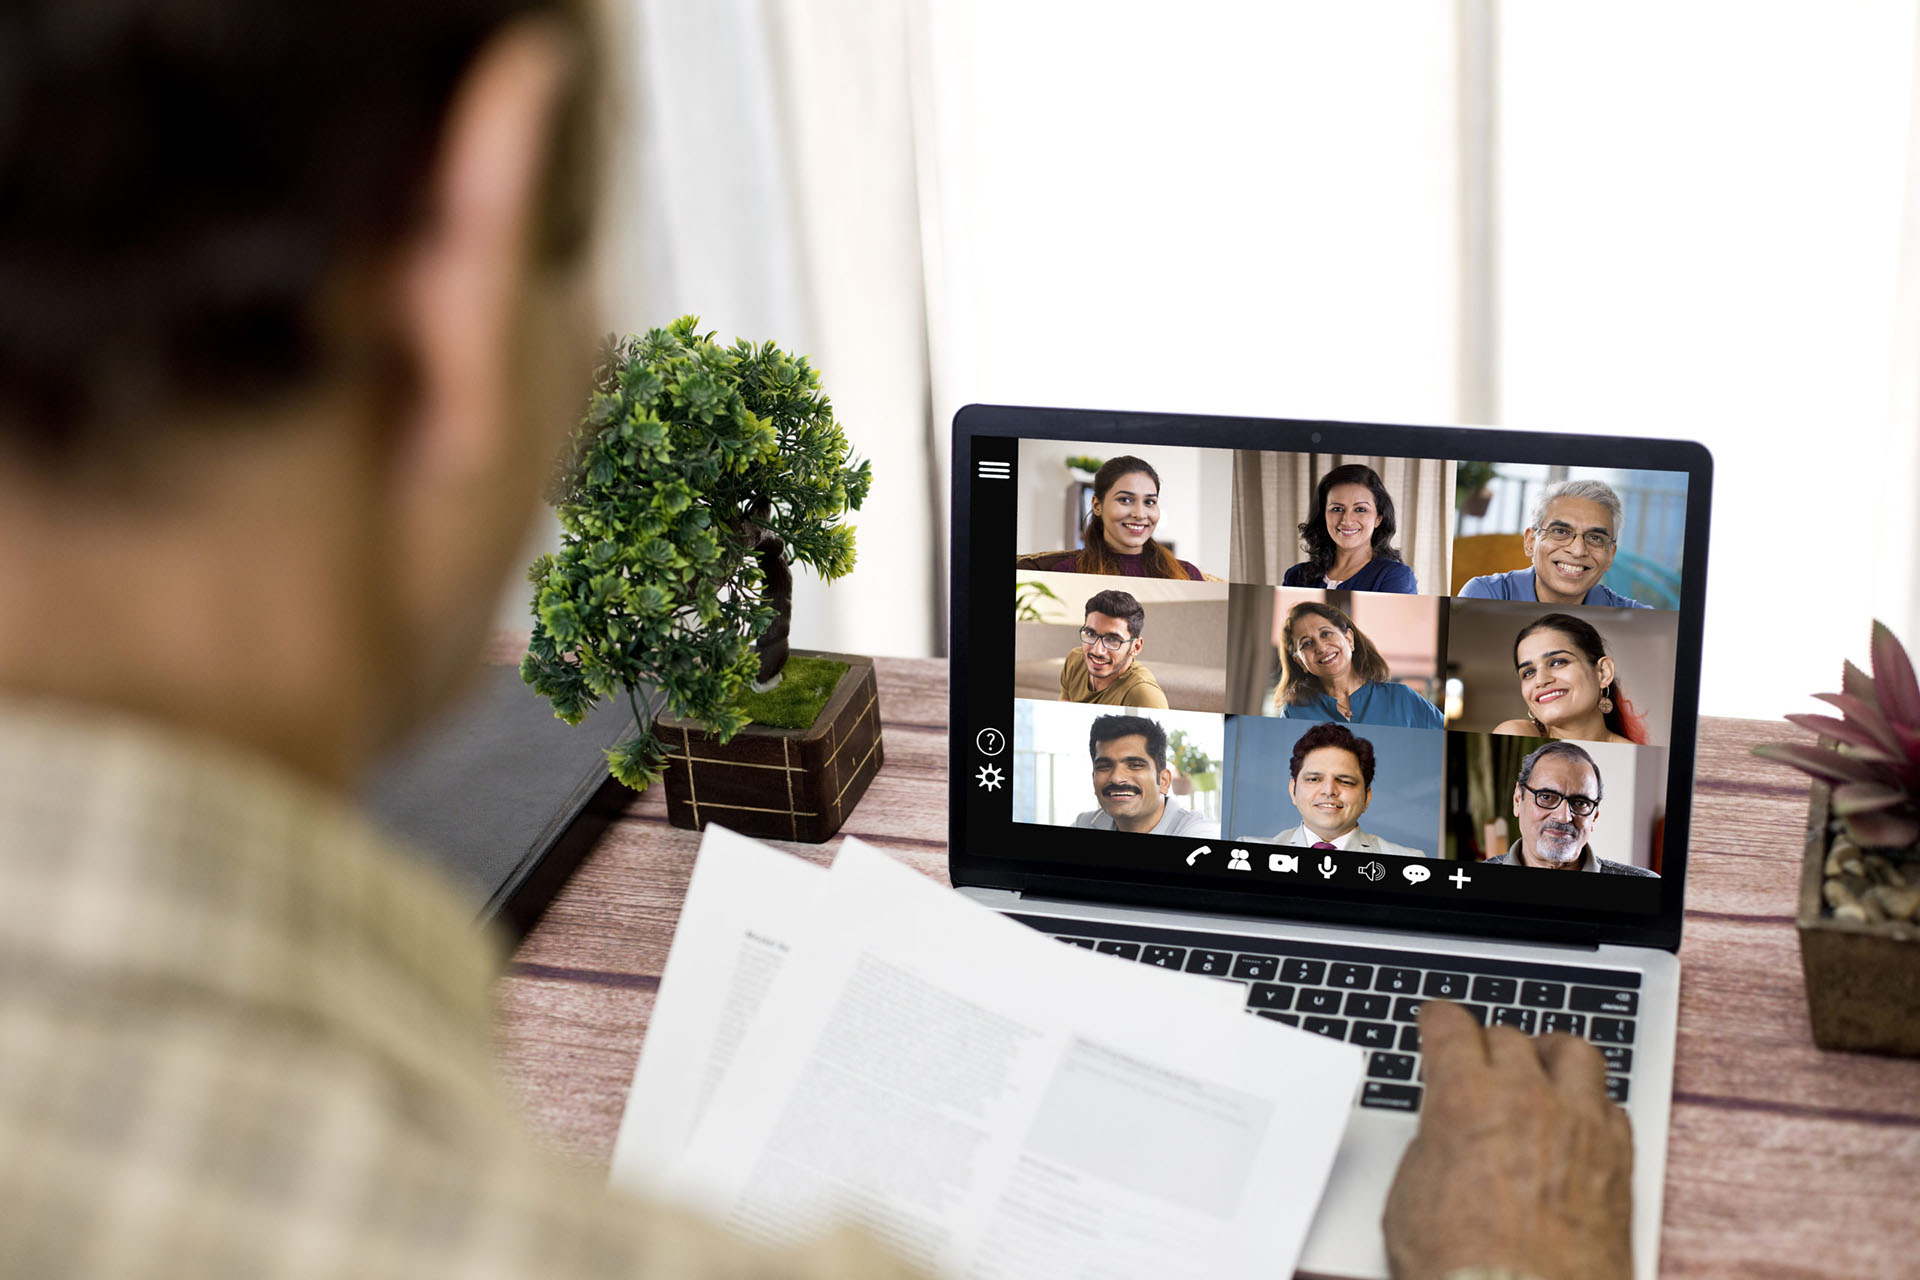 A man attends a business video call meeting on laptop at home